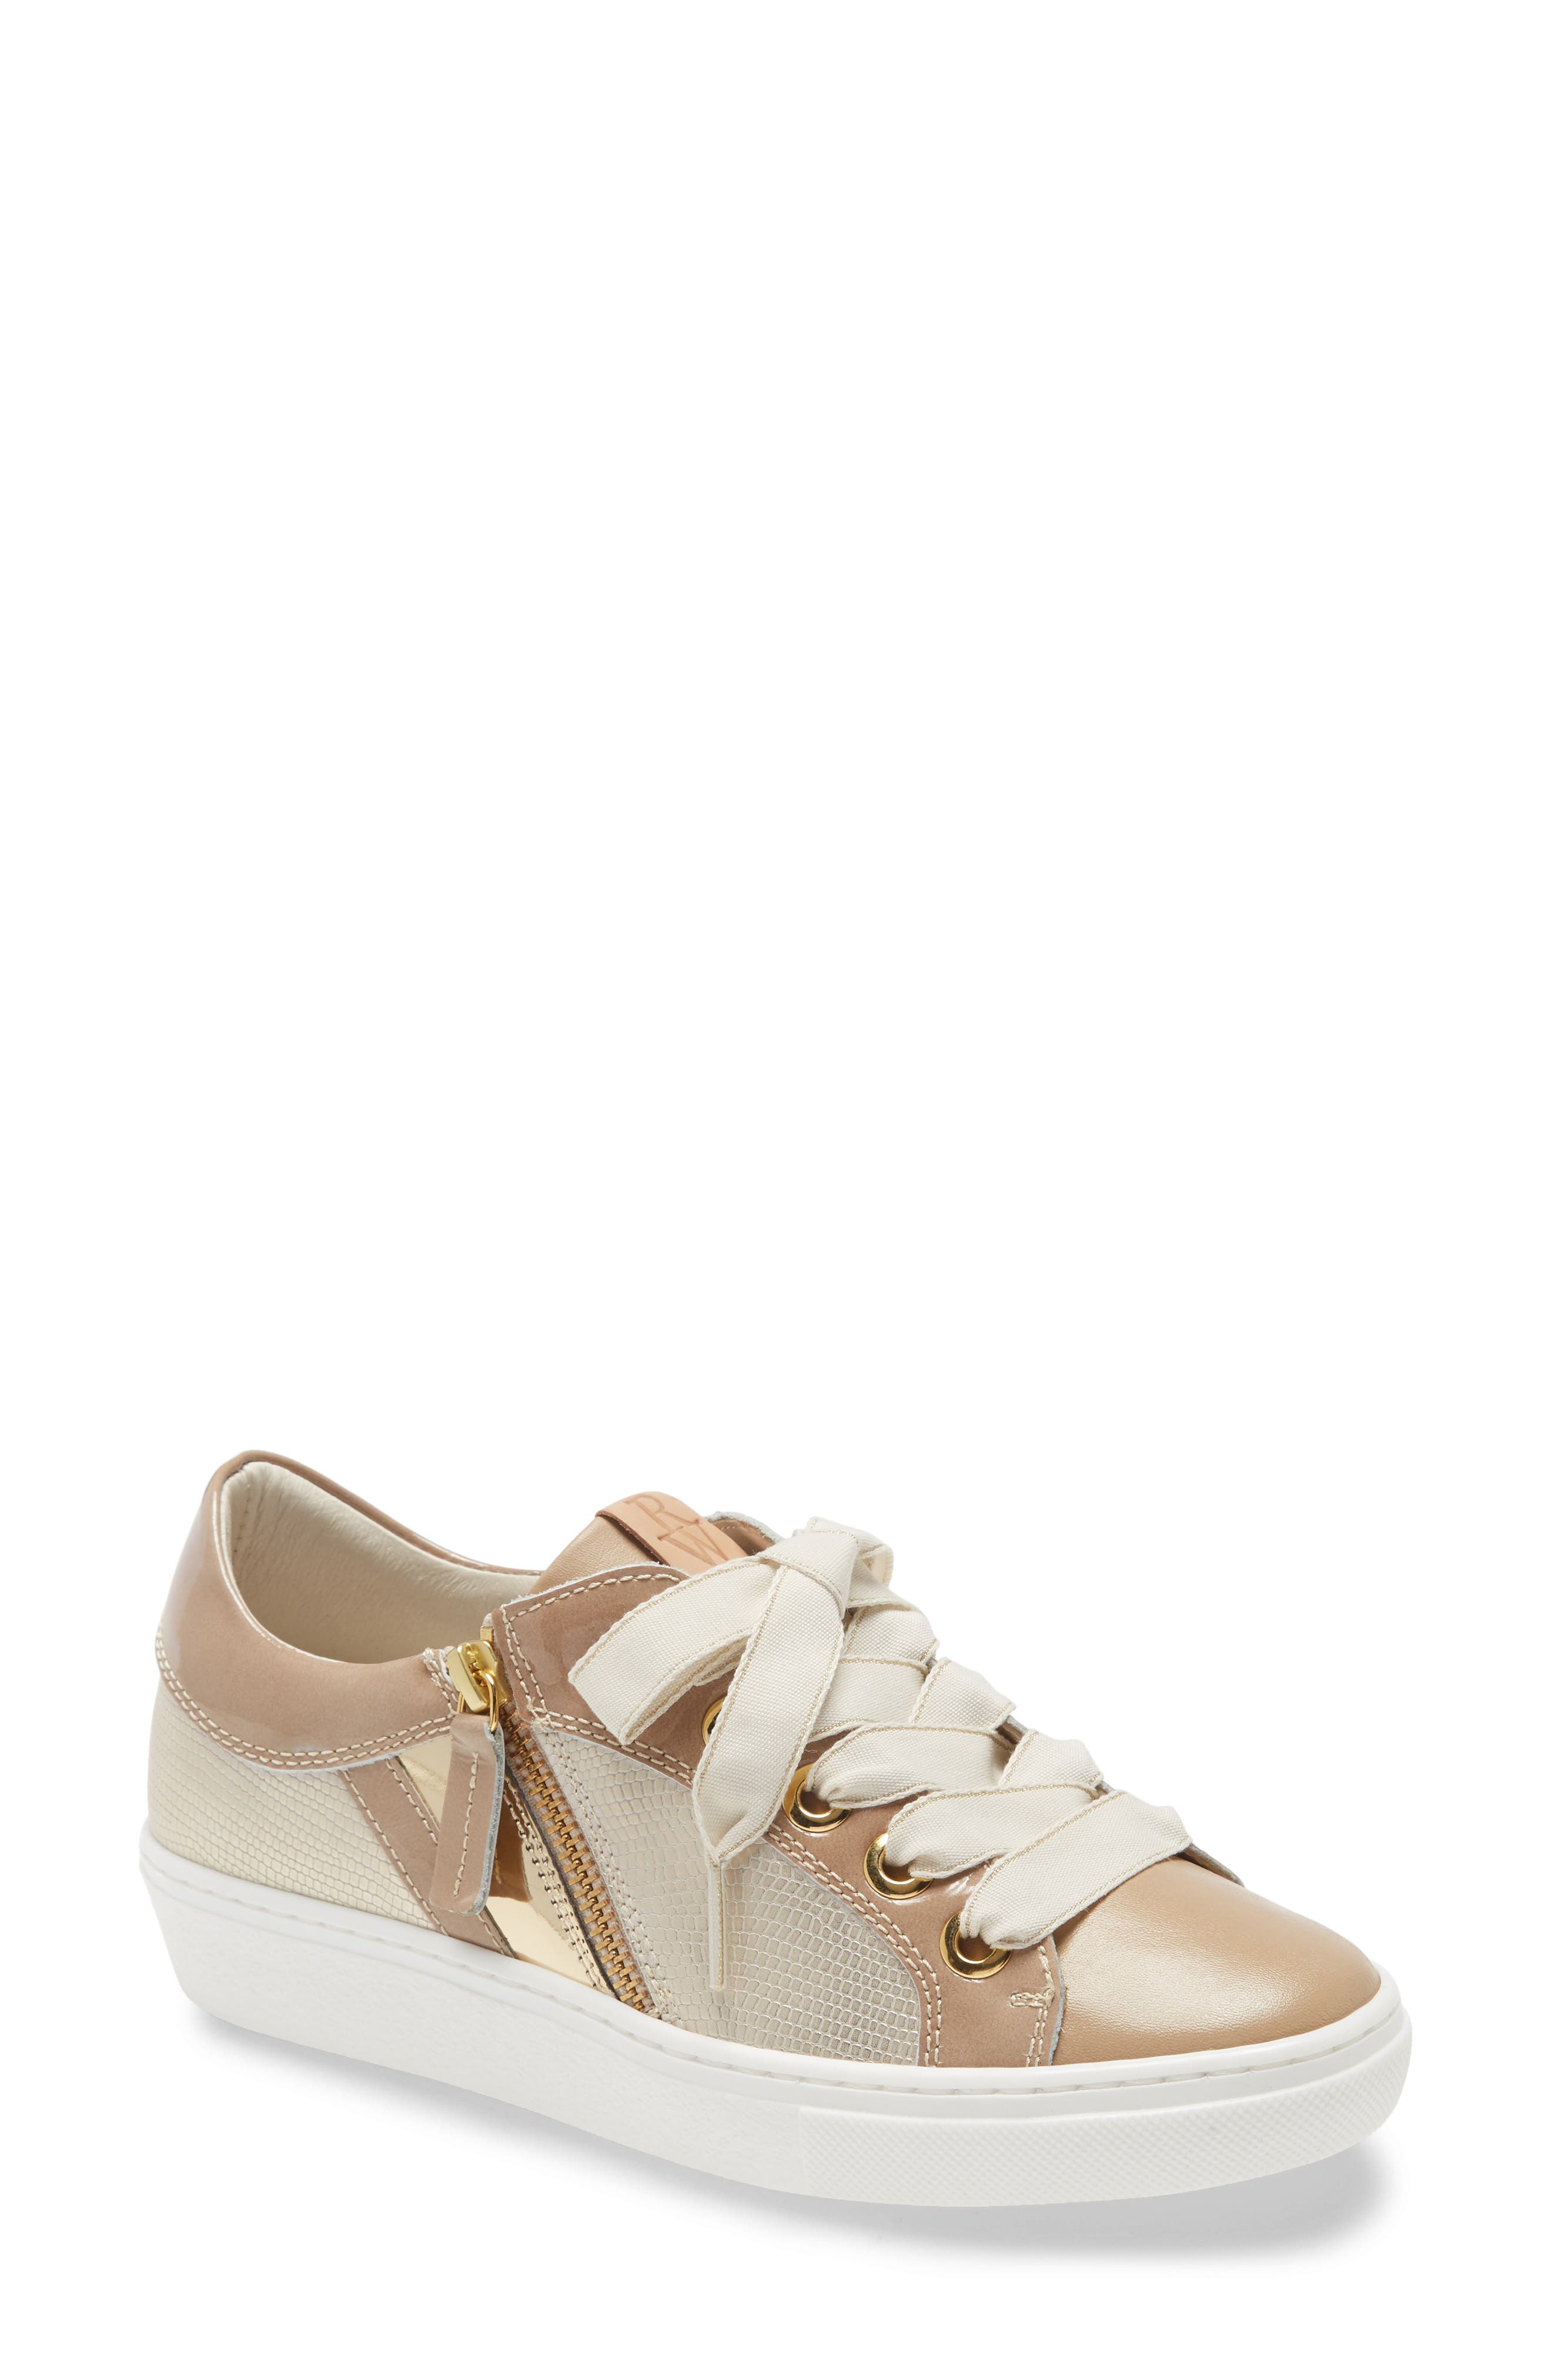 Women's Ron White Shoes | Nordstrom